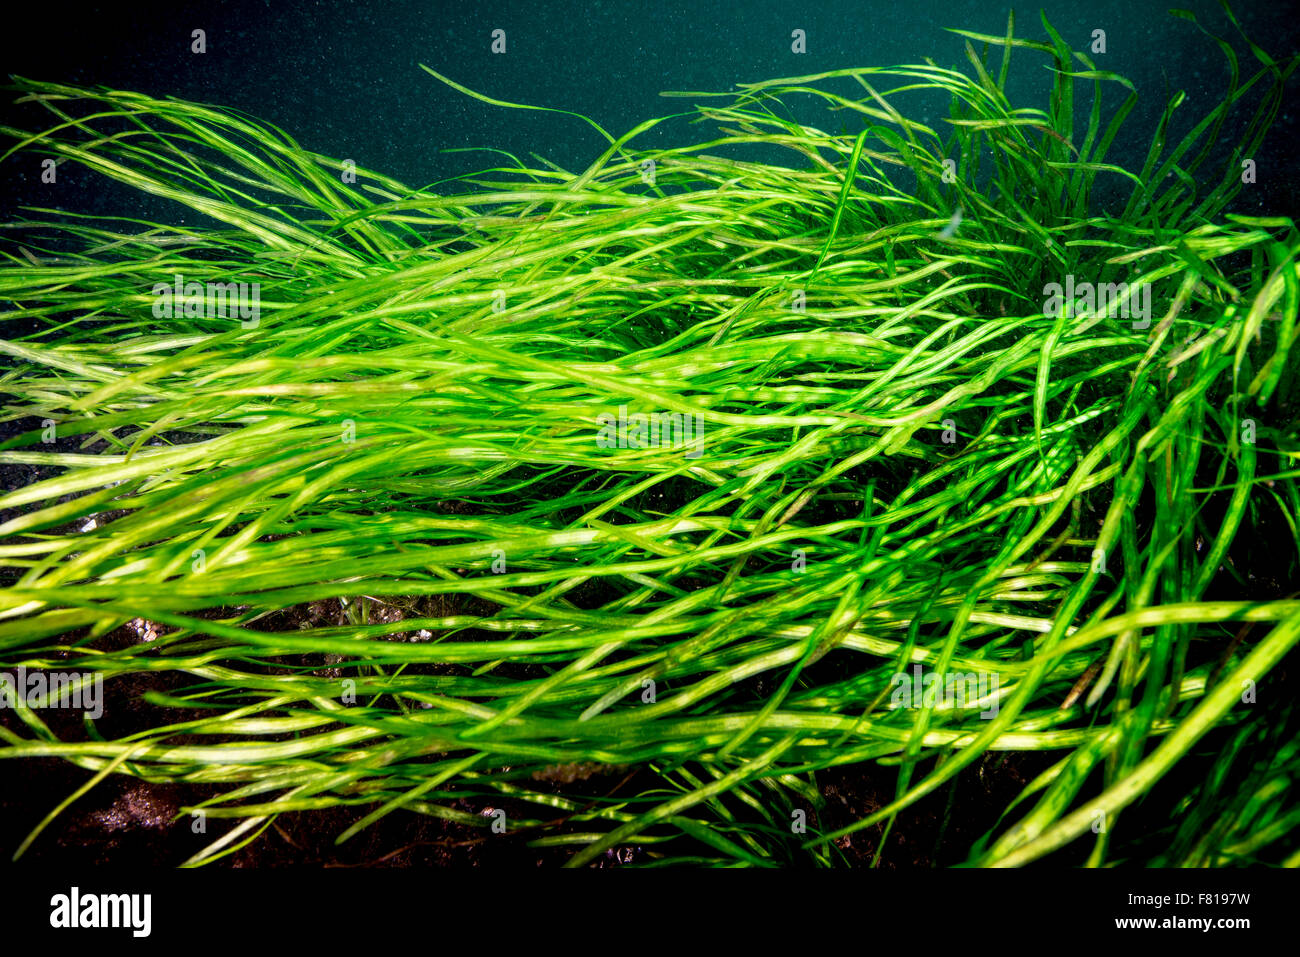 American Eel-grass underwater in the St. Lawrence River Stock Photo